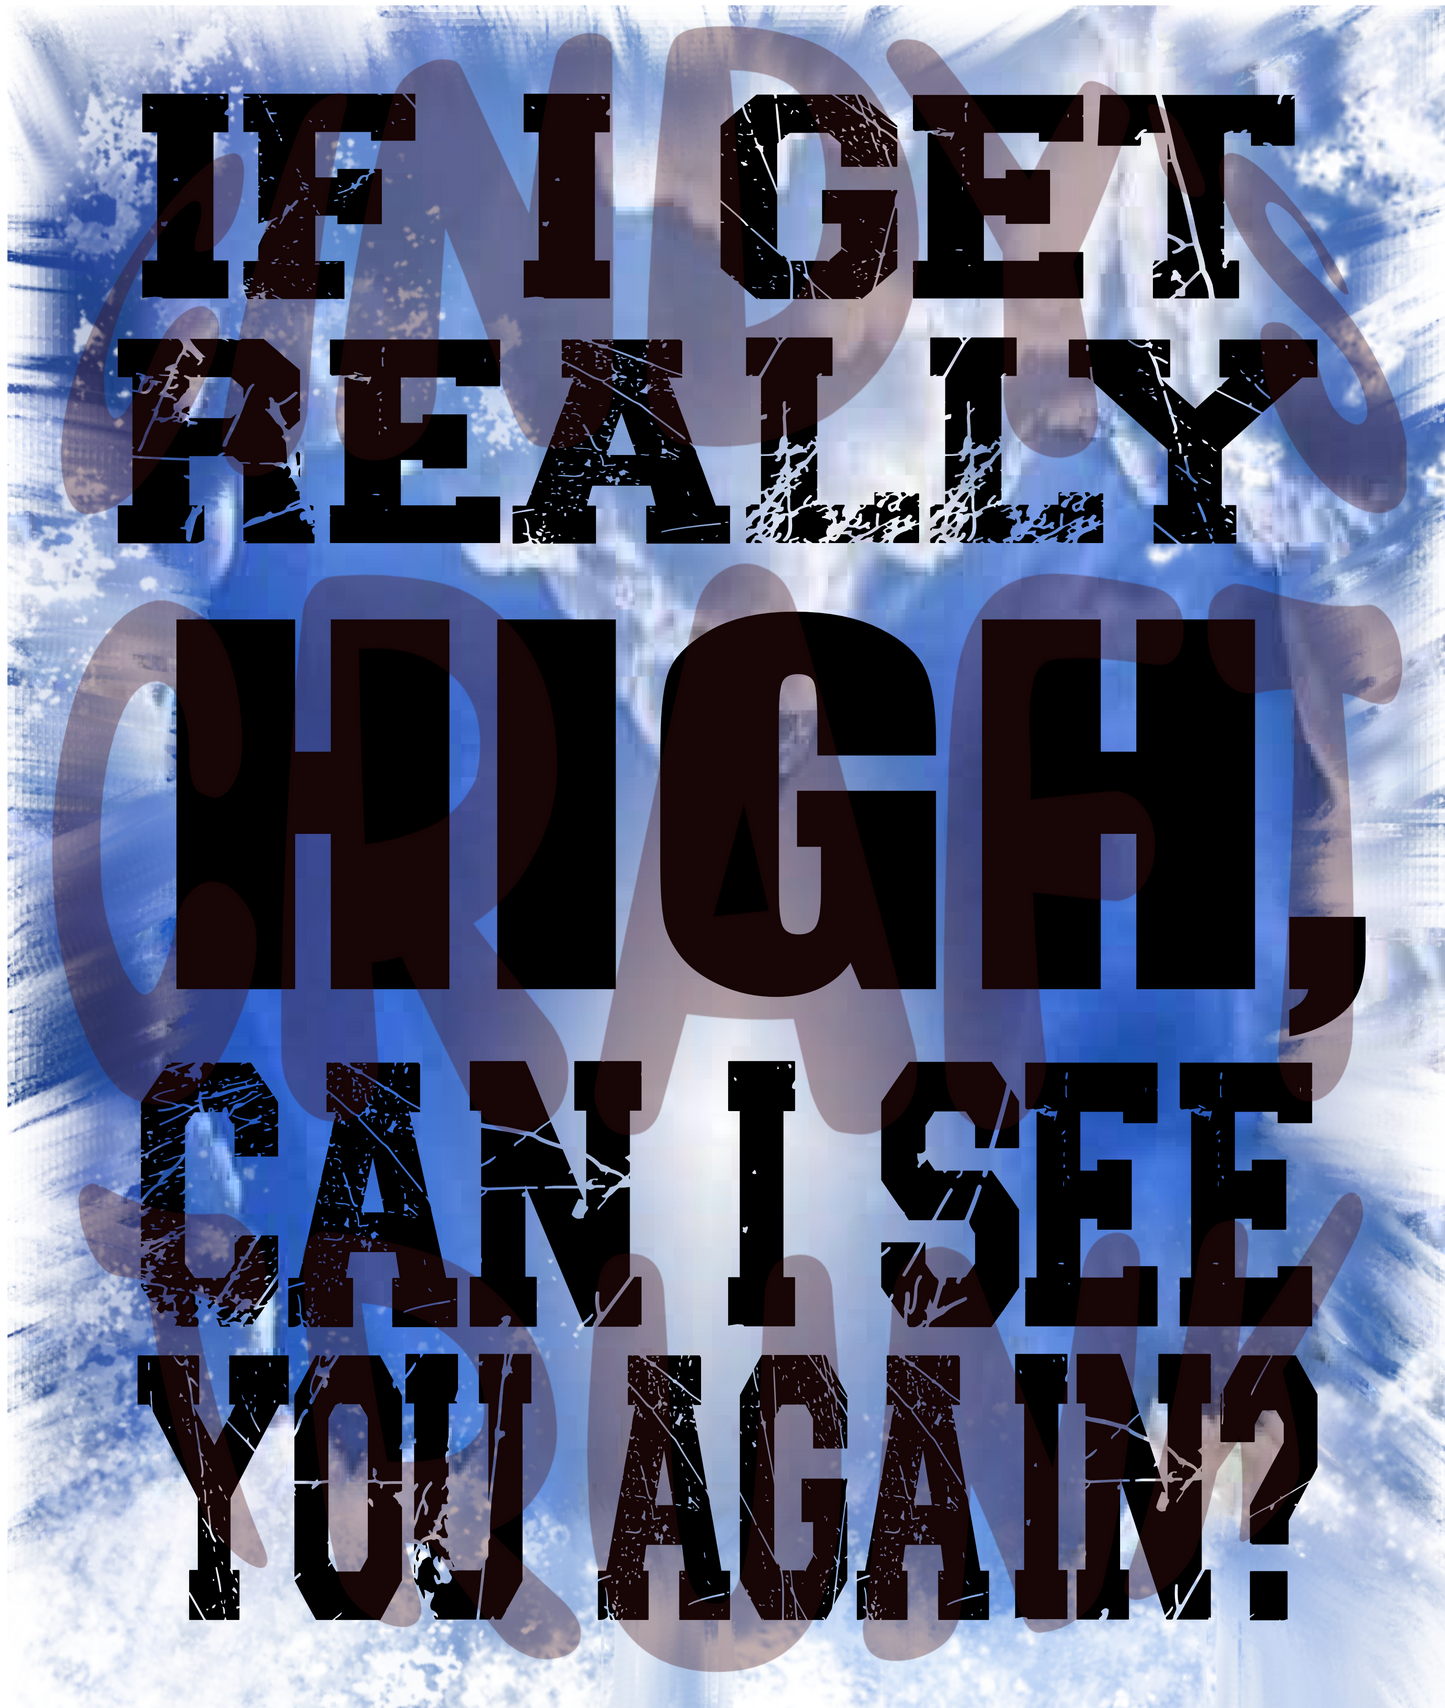 If I get really high PNG